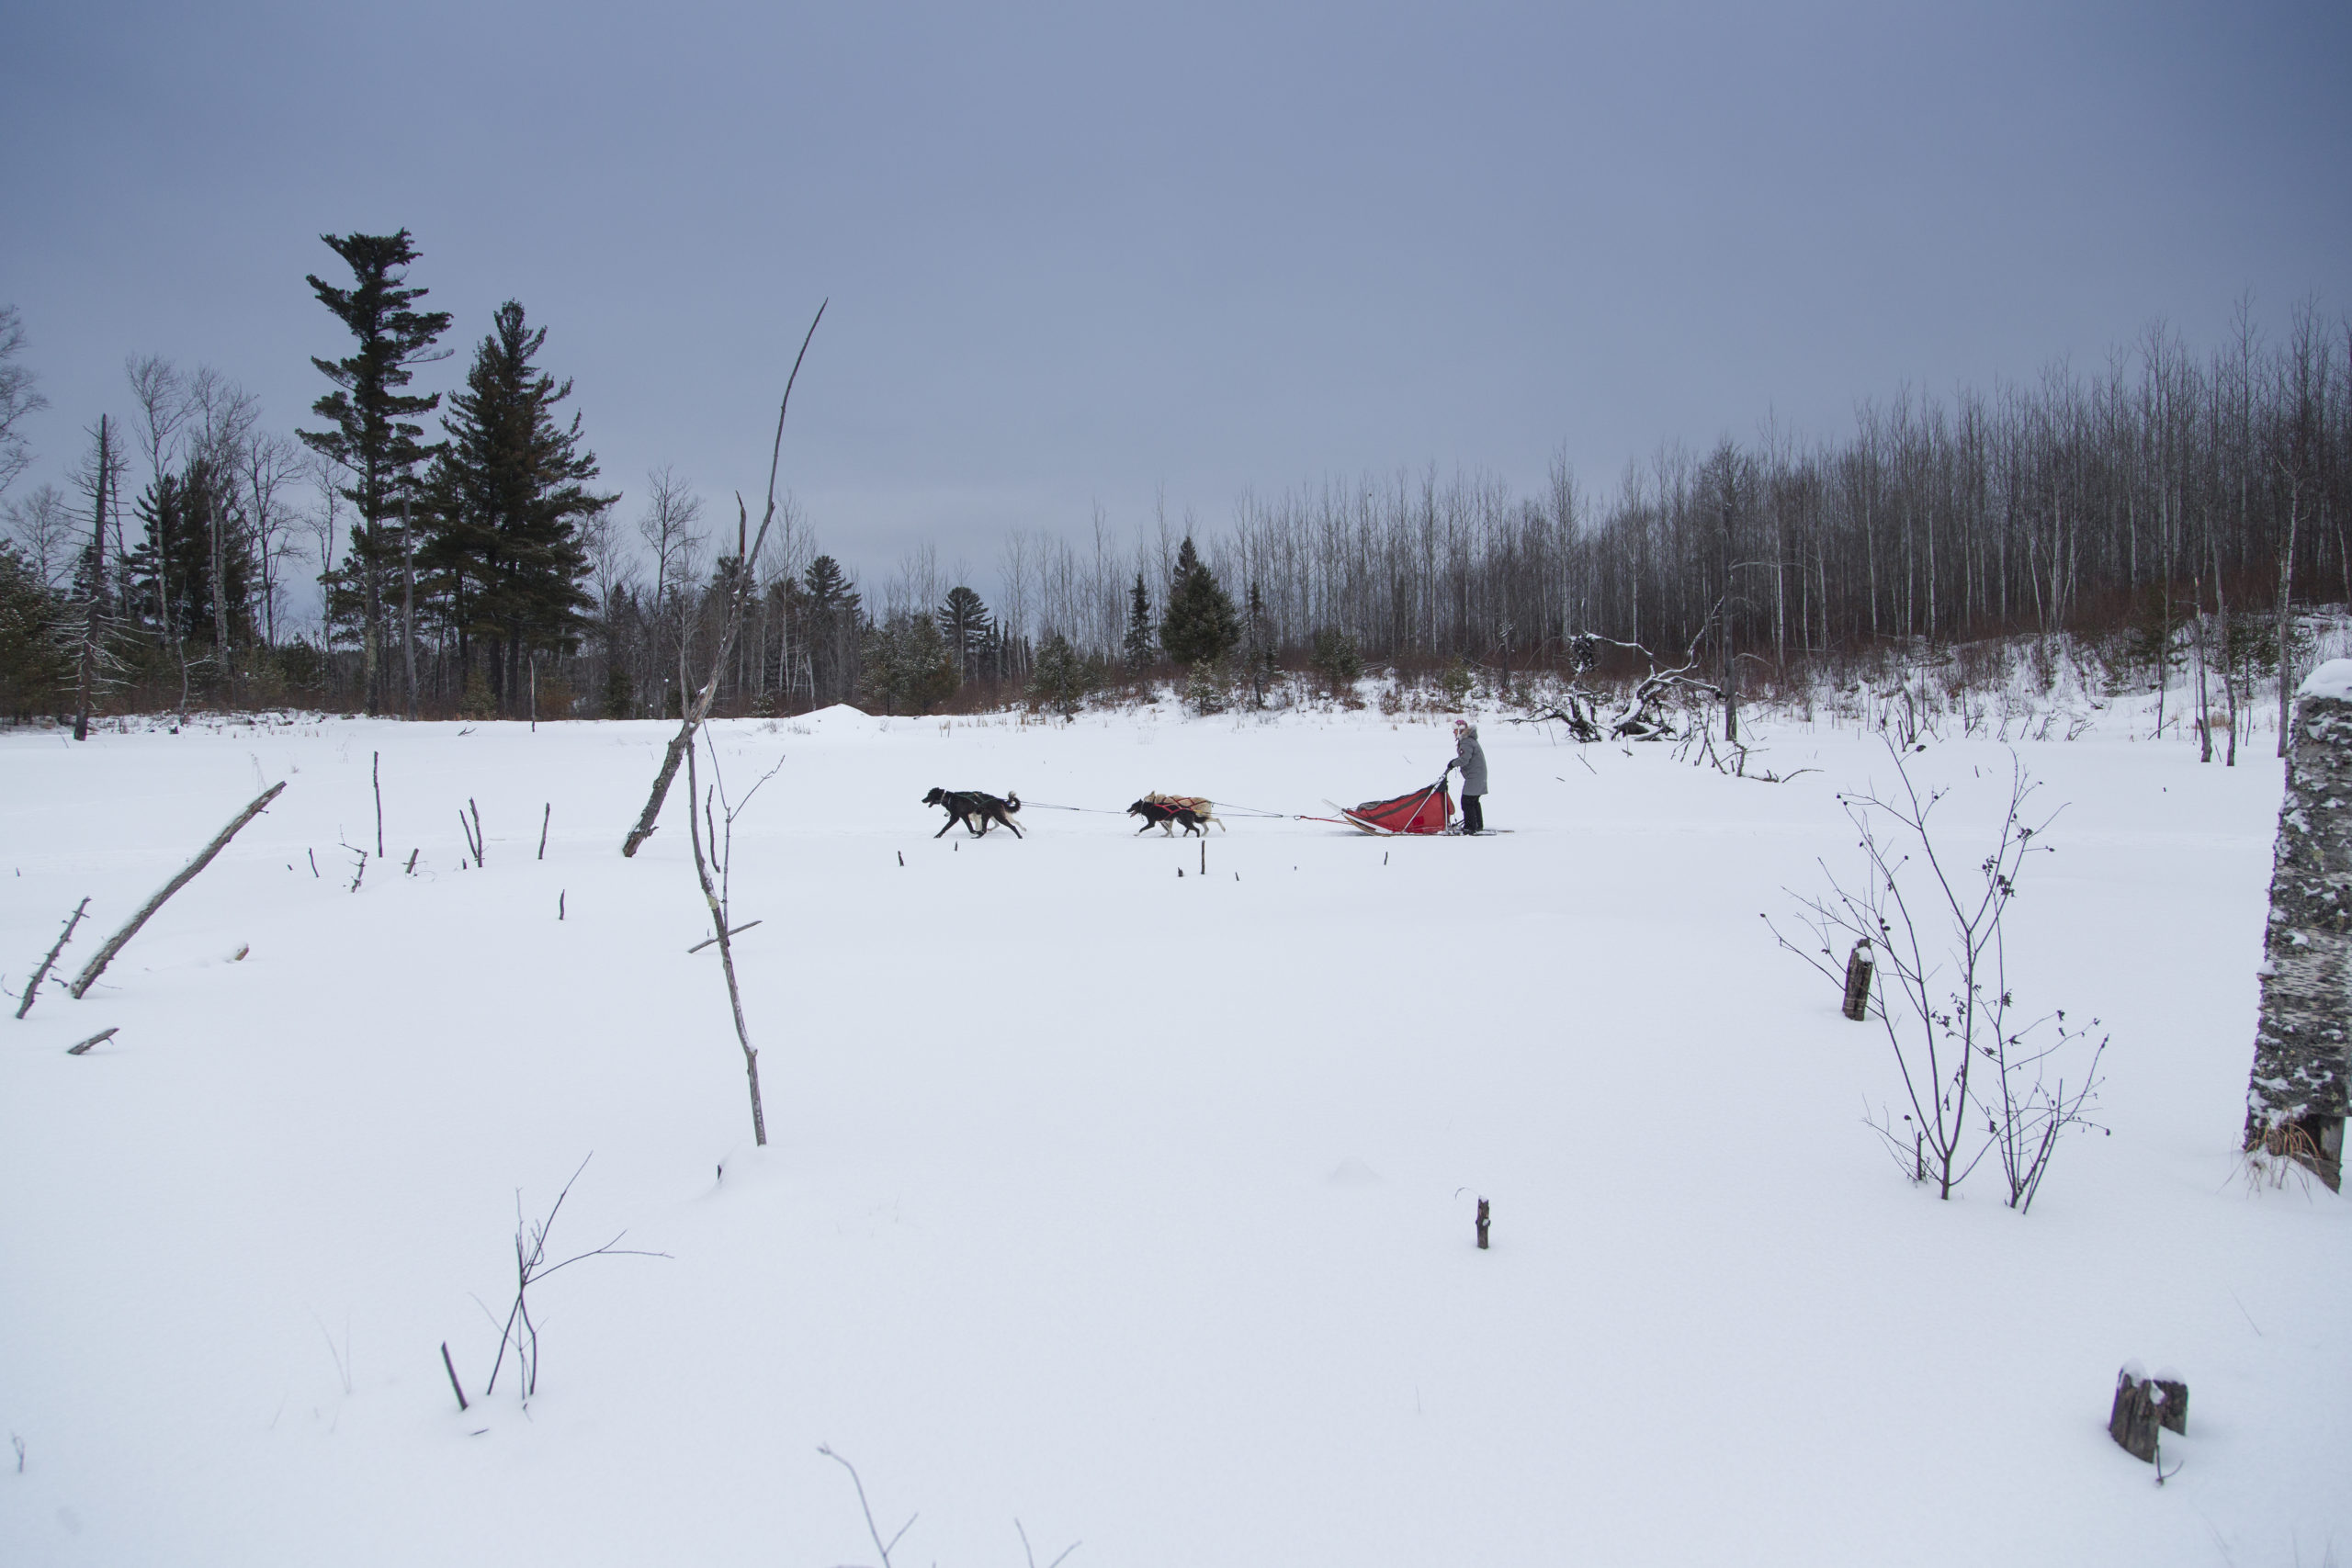 White Wilderness dog sled team in the distance of a snowy clearing